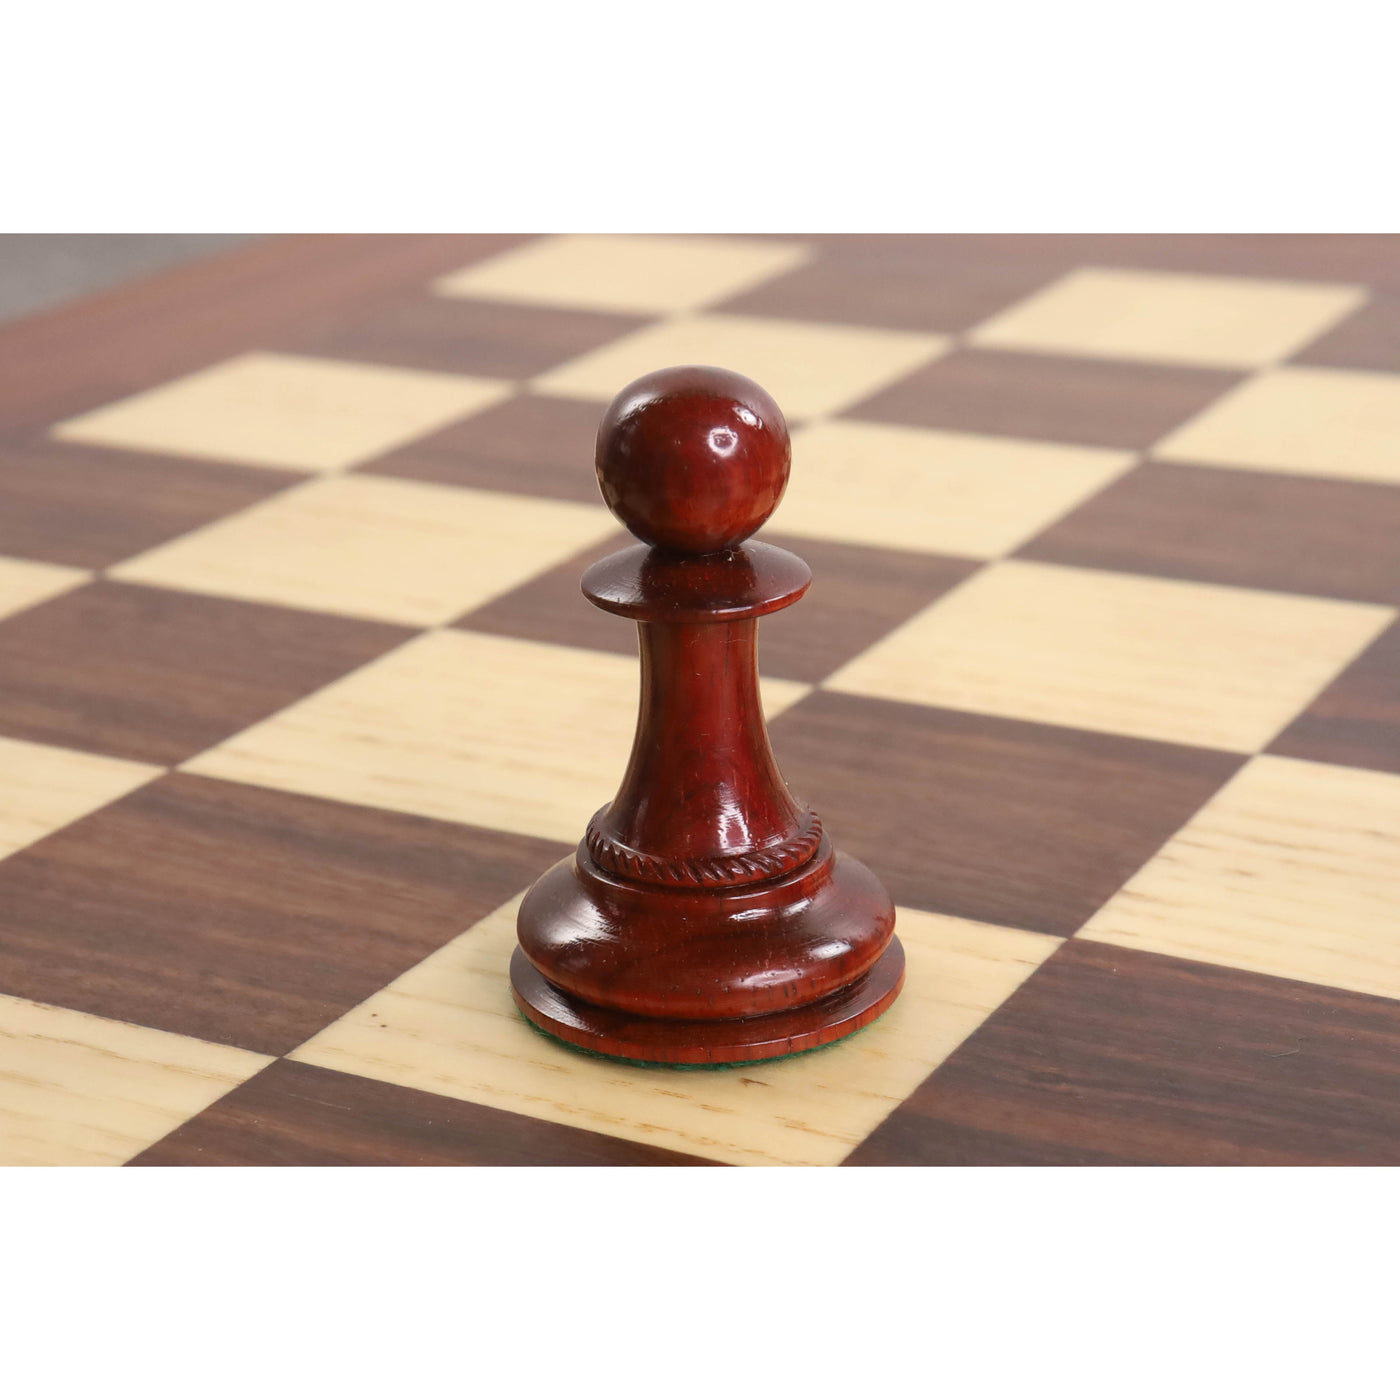 4.5" Imperator Luxury Staunton Chess Set - Chess Pieces Only-Bud Rosewood -Triple Weight